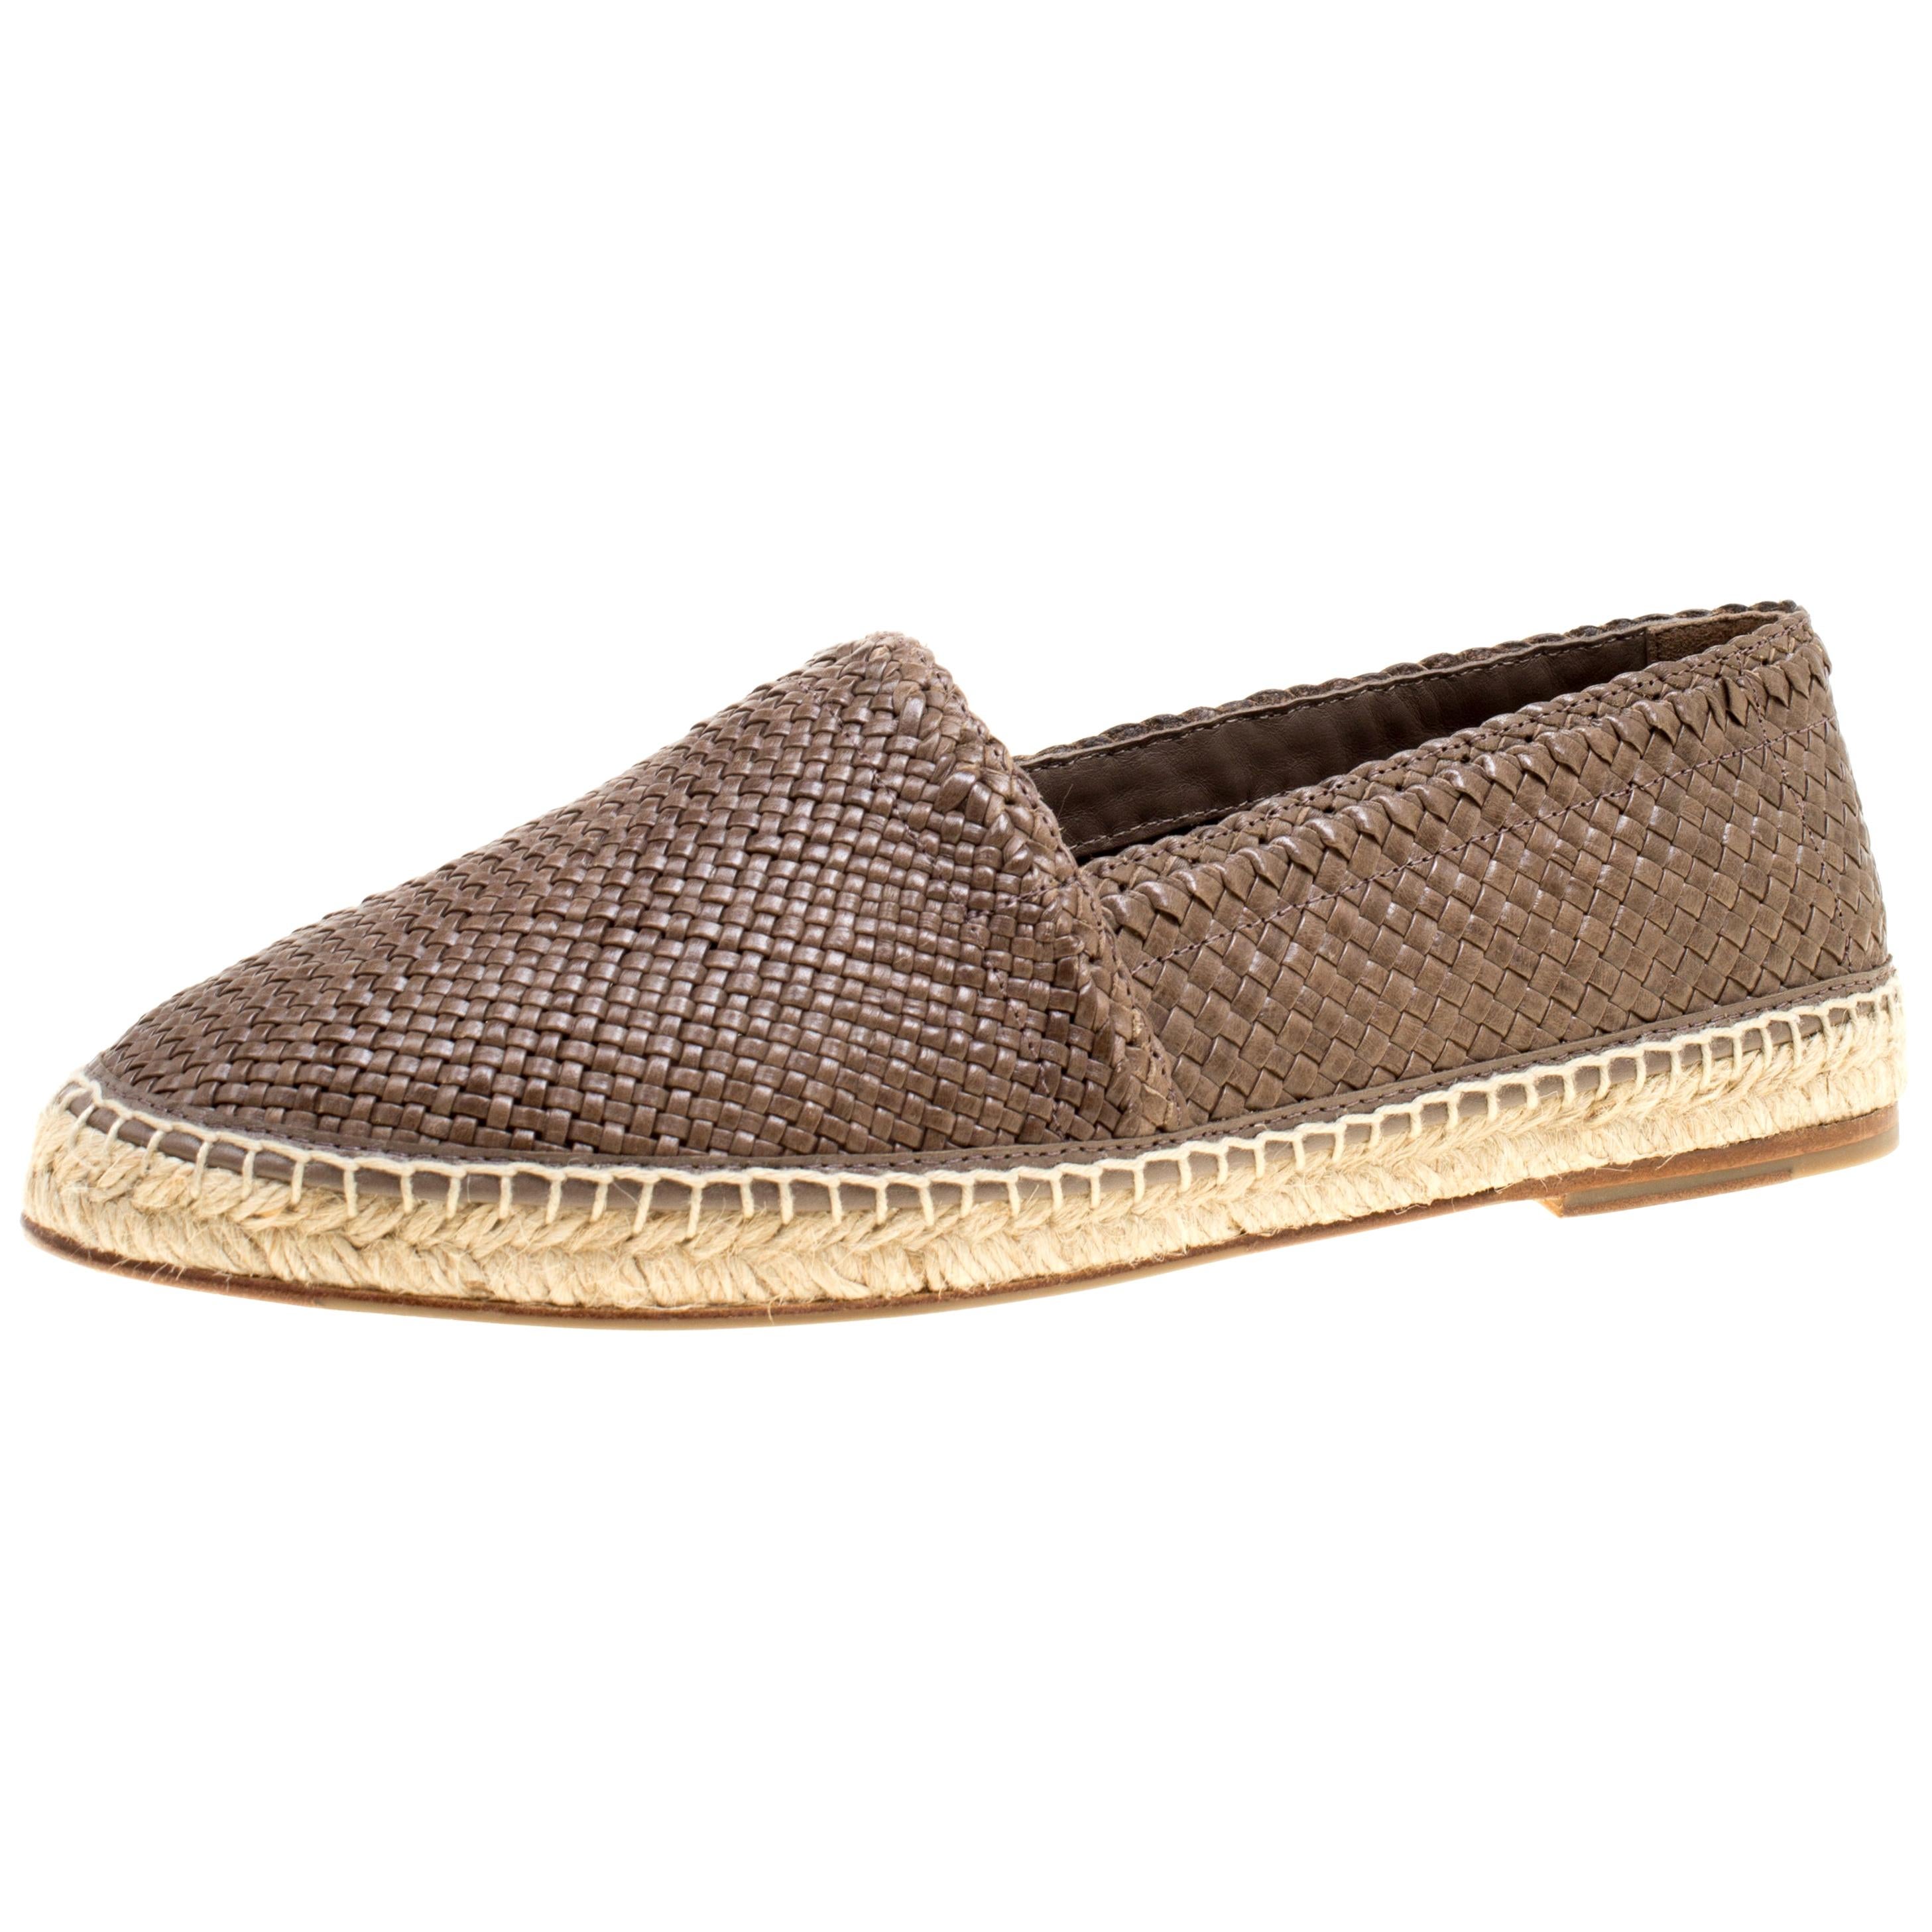 Dolce and Gabbana Brown Braided Leather Espadrilles Size 42